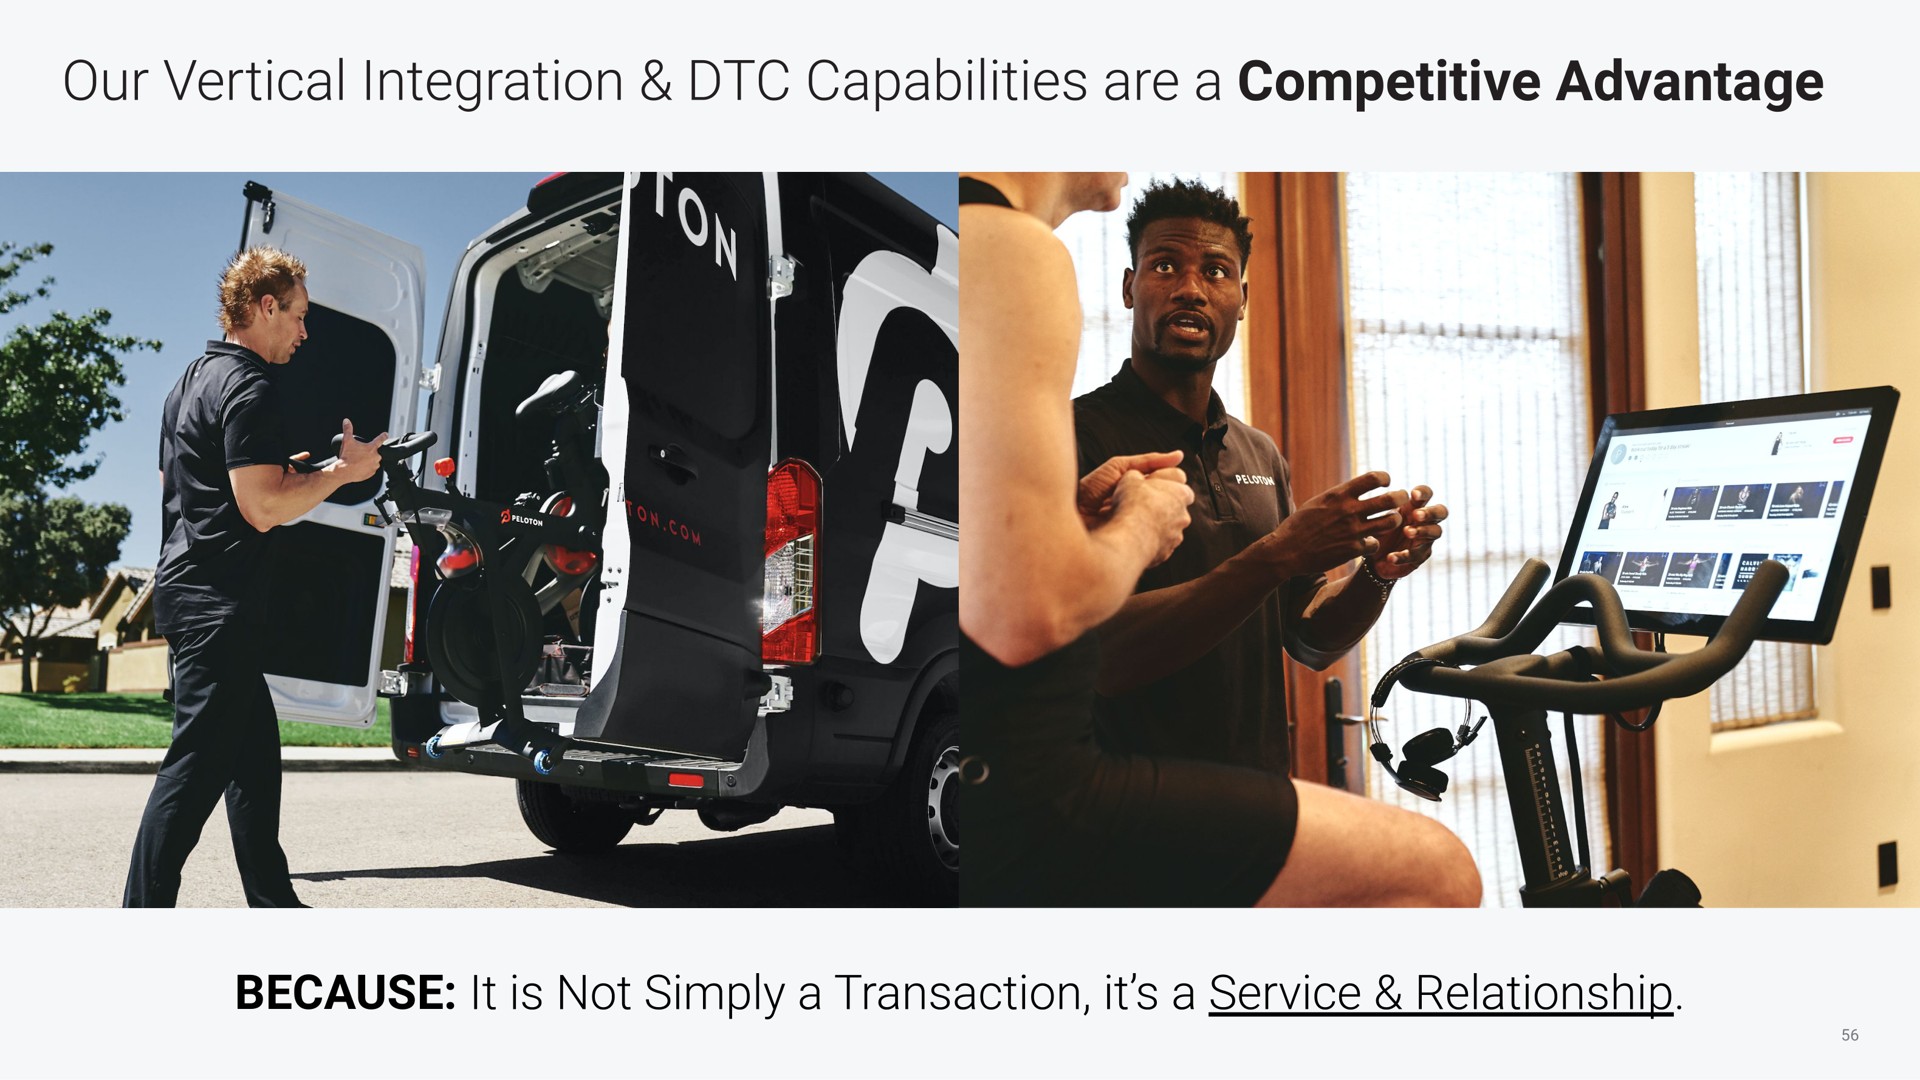 competitive advantage because our vertical integration capabilities are a | Peloton